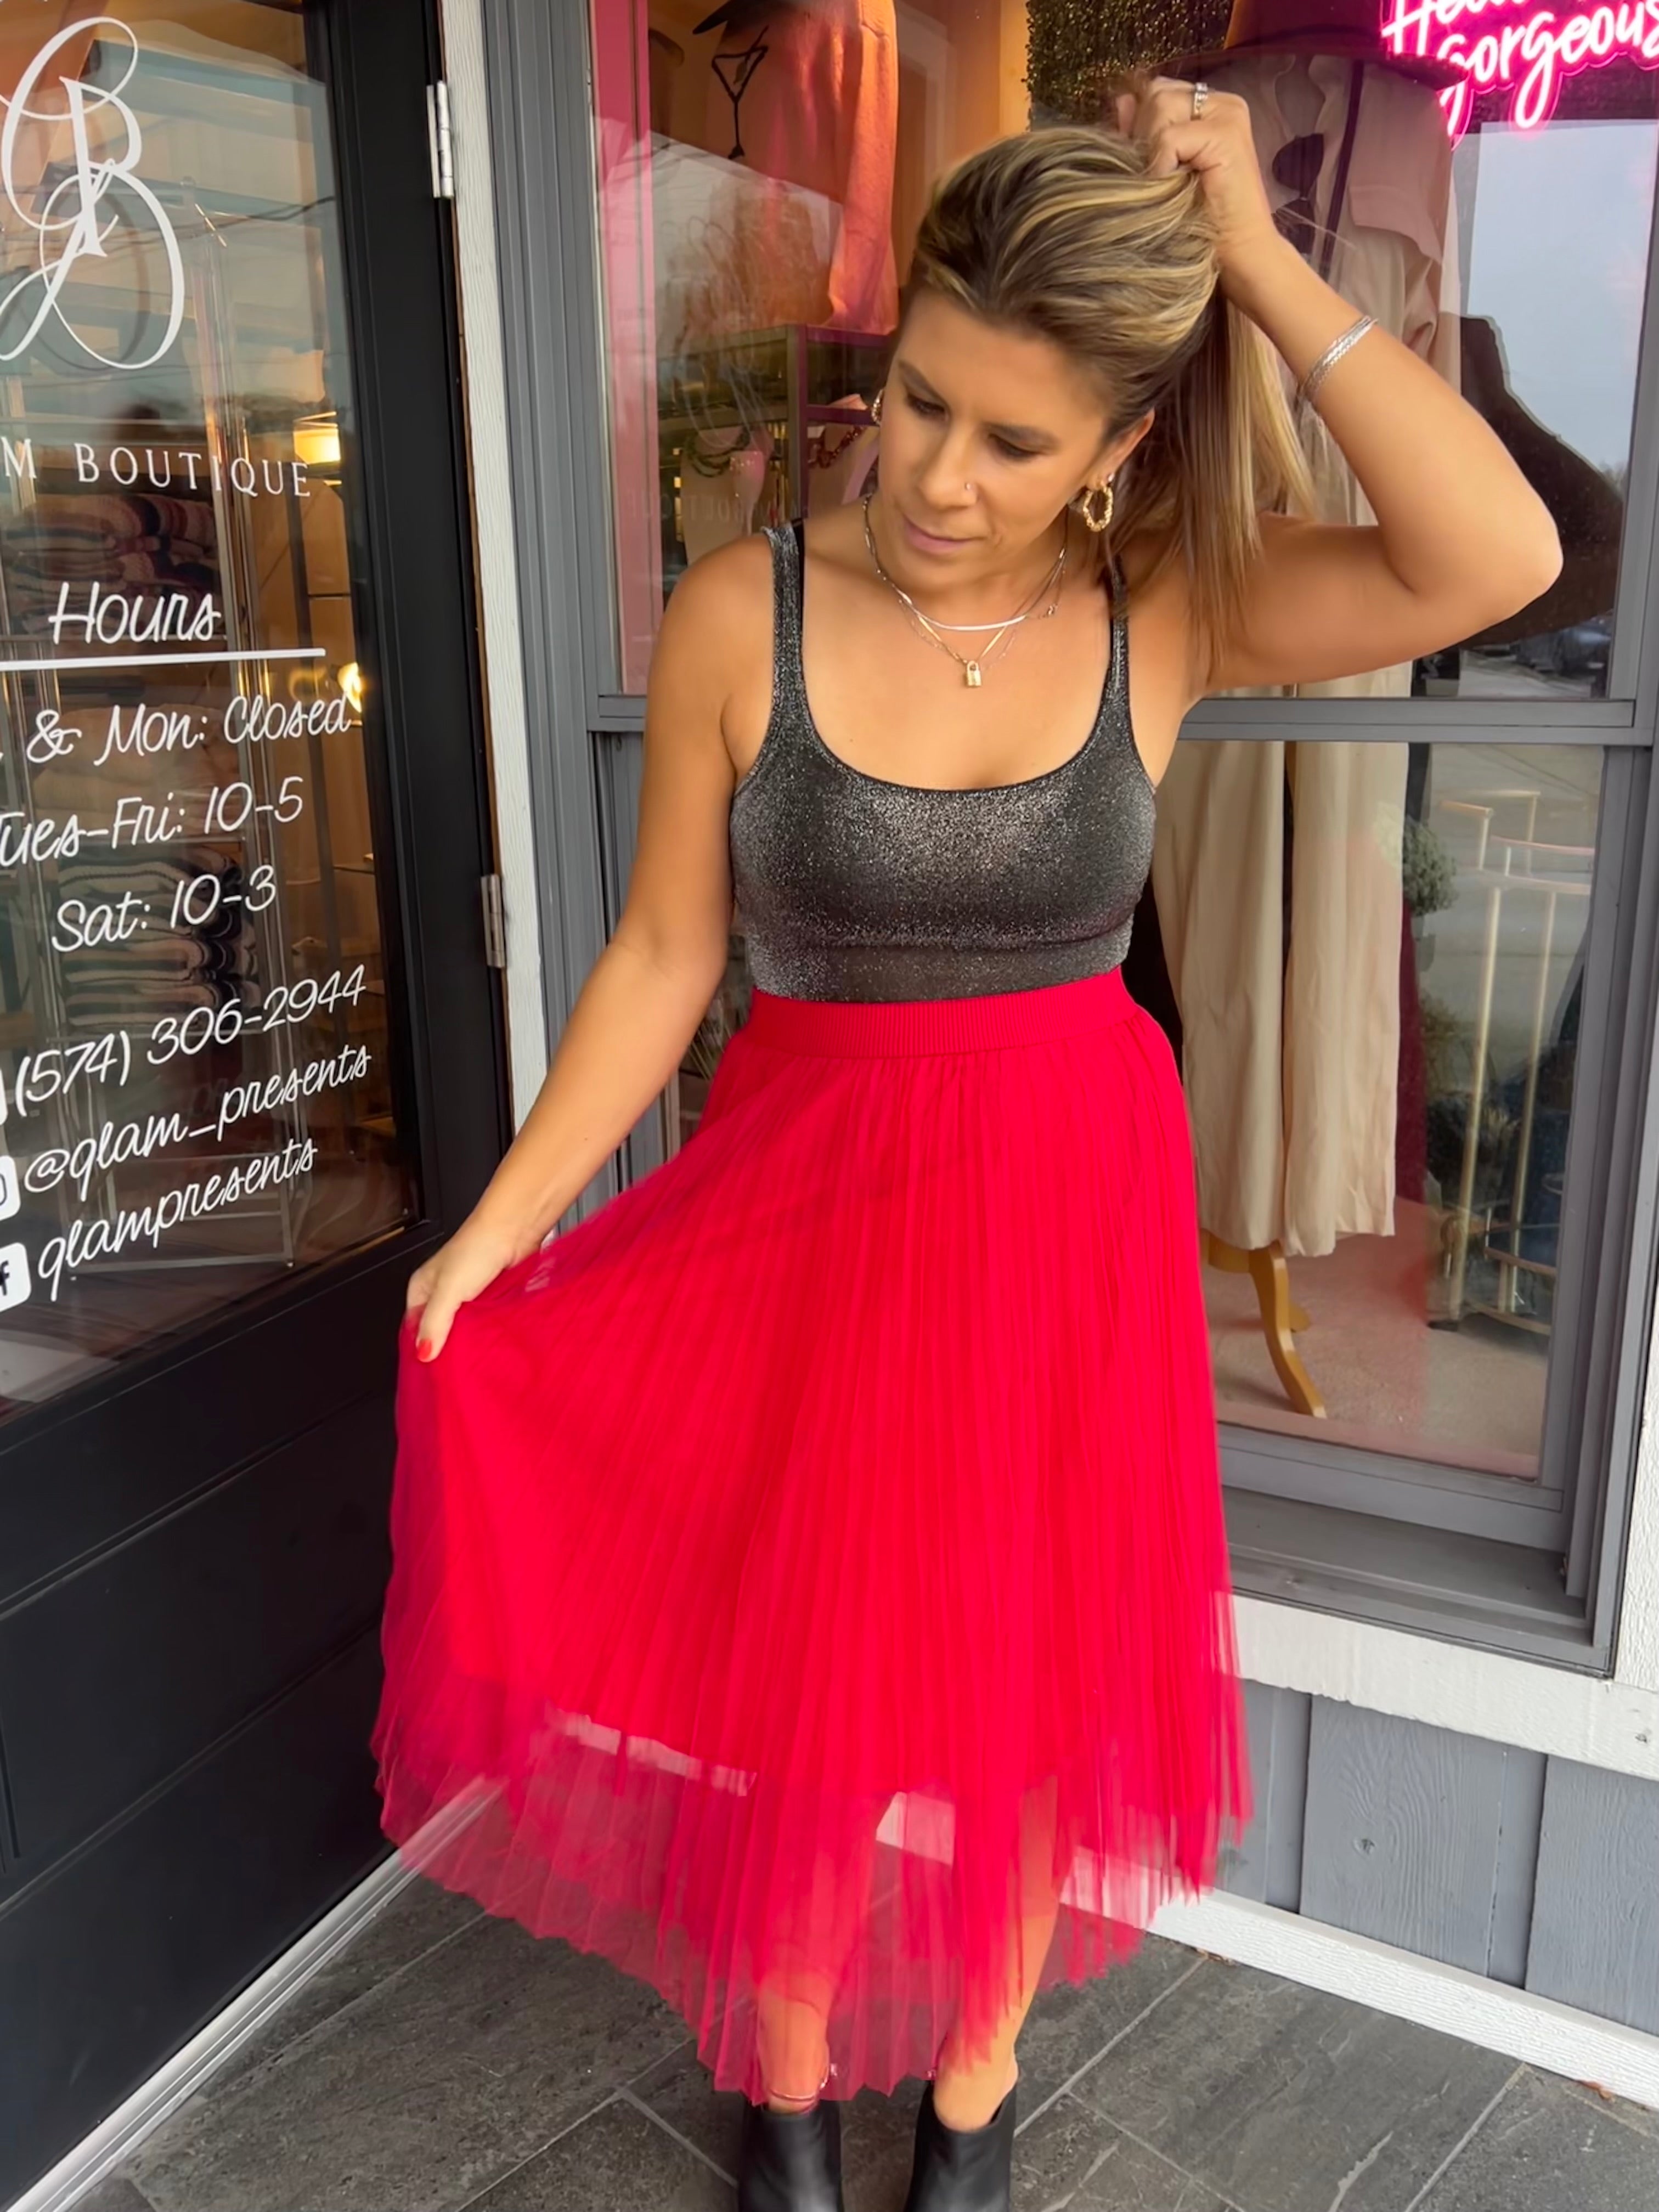 Mesh Pleated Midi Skirt in Hot Pink and Red